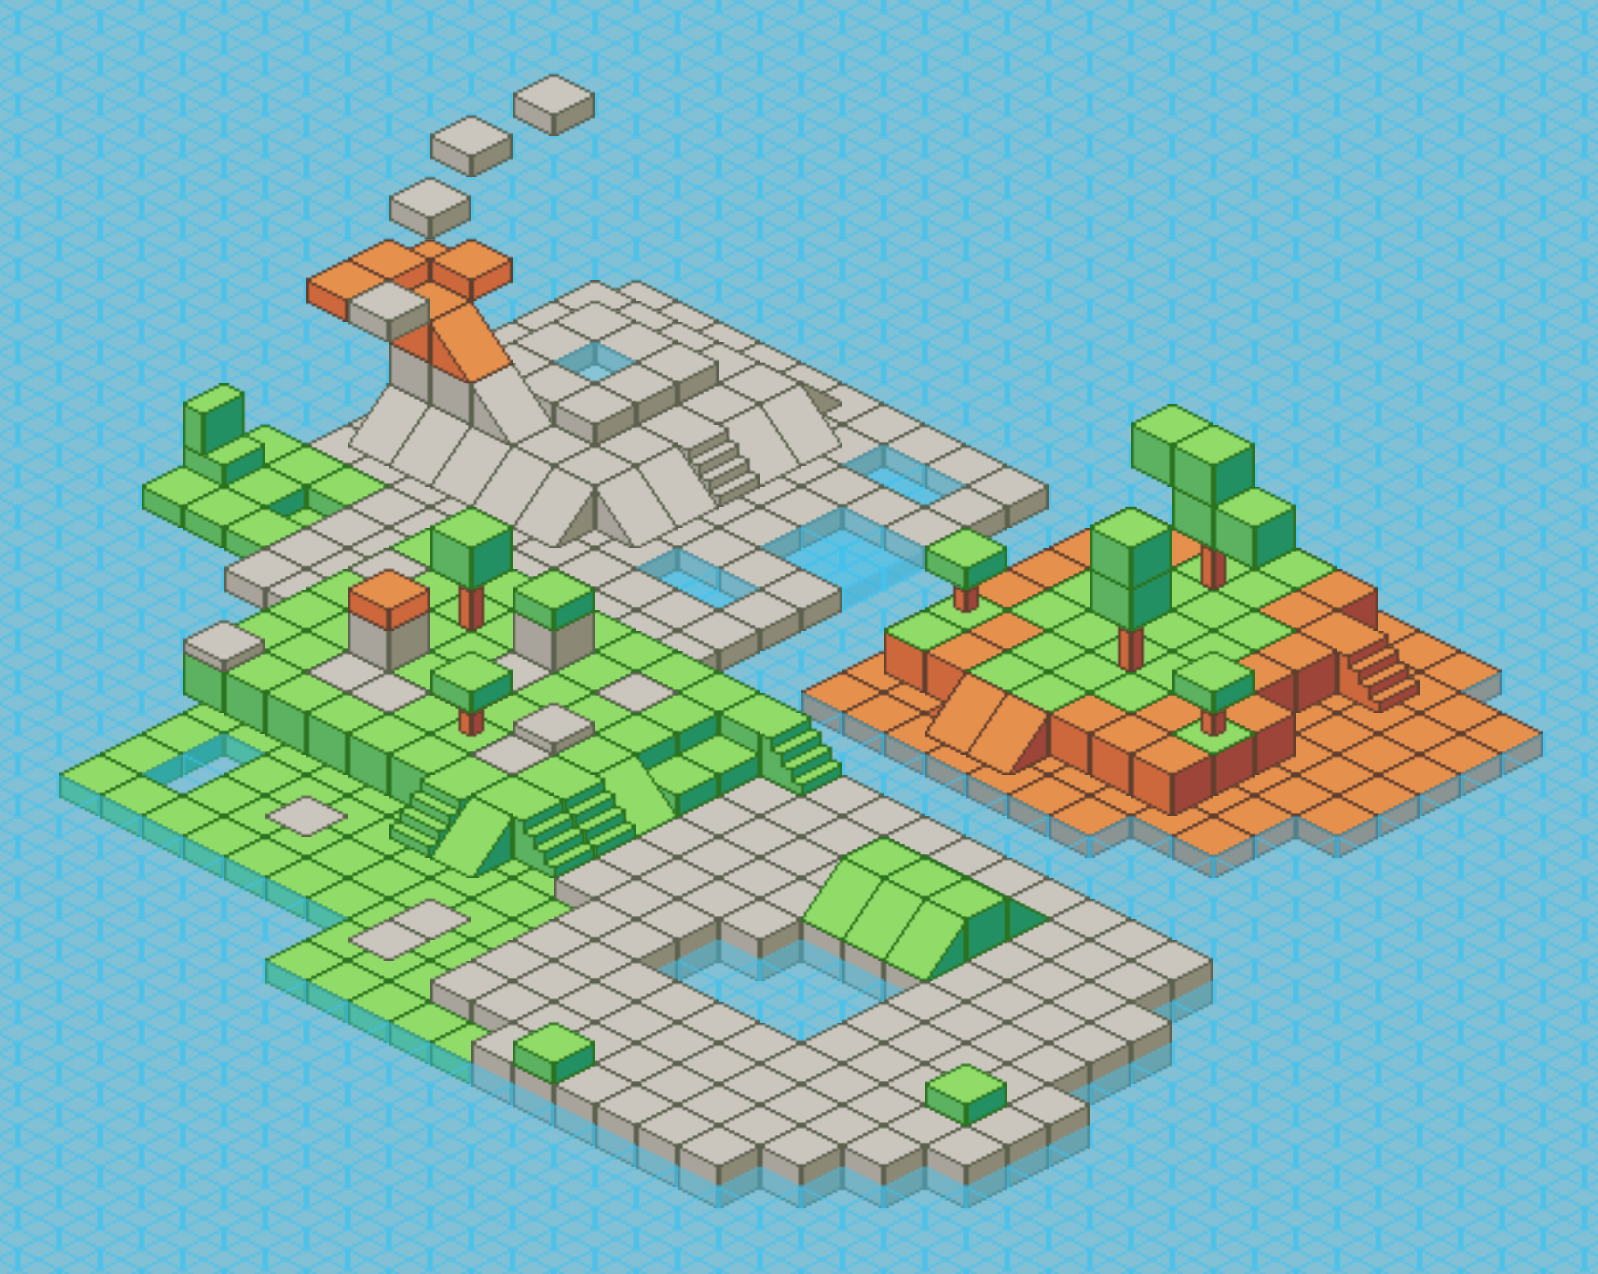 Isometric Tiles Template For 32x32 Pixel Art By Route1rodent